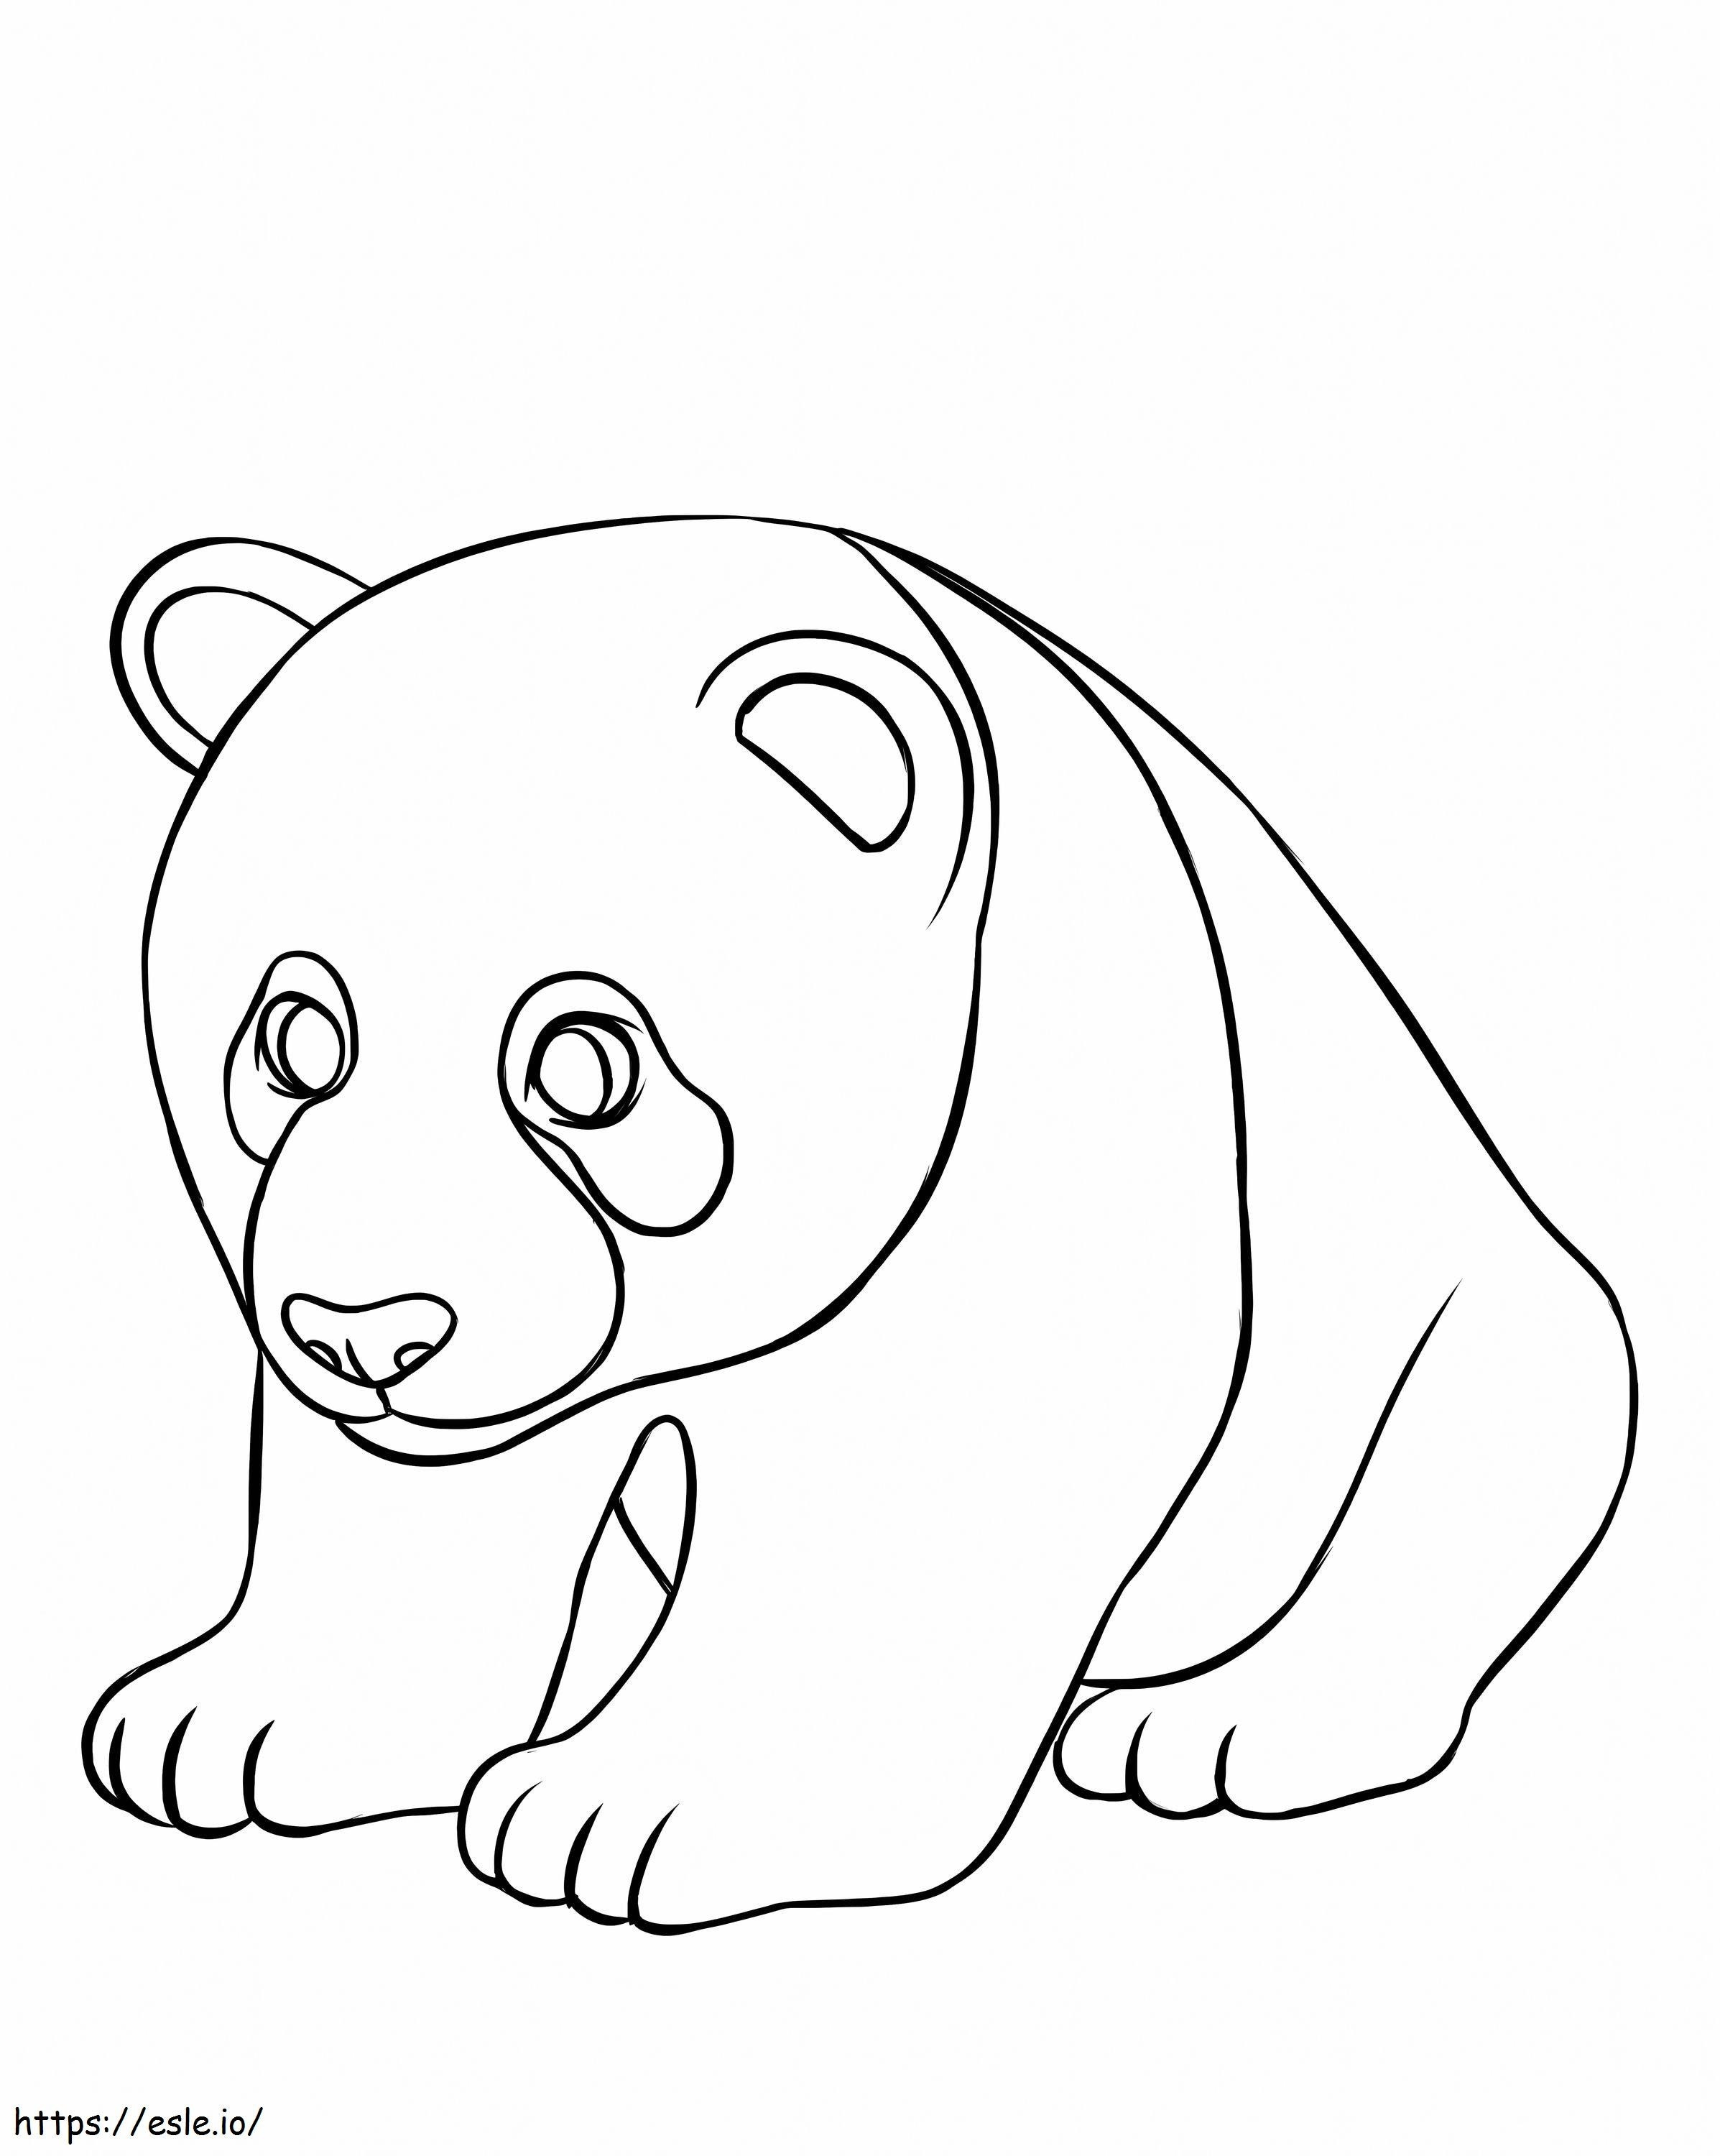 Awesome Panda coloring page